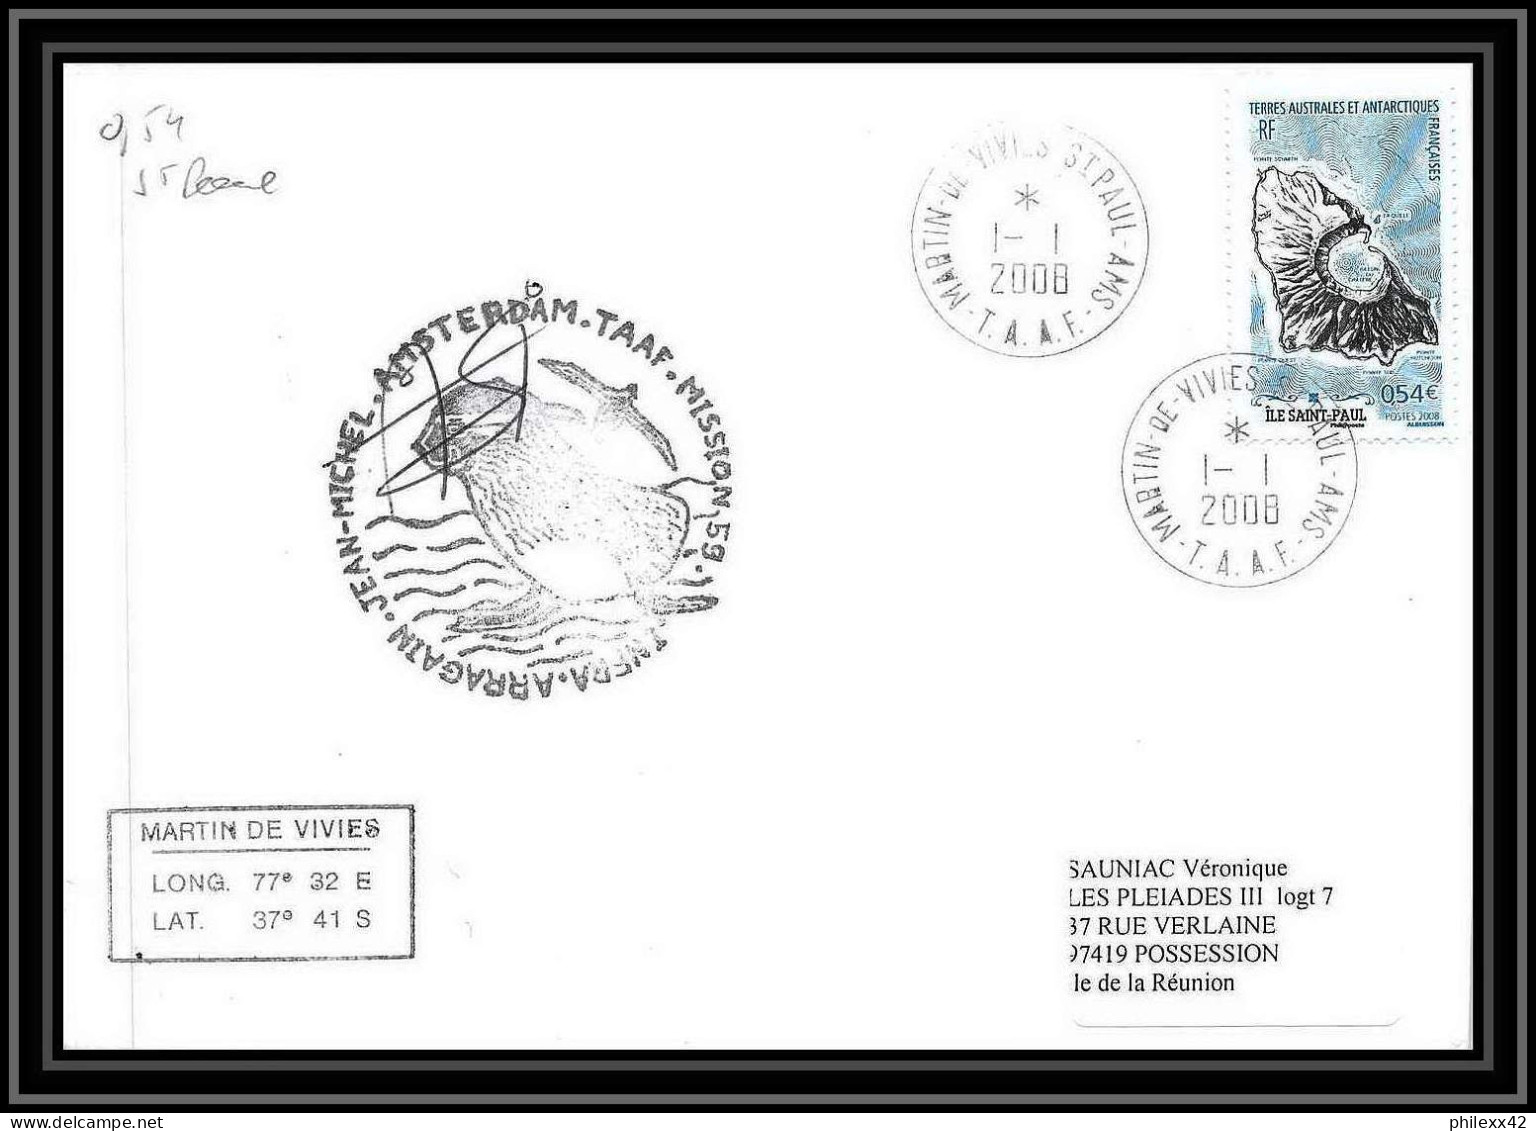 2765 ANTARCTIC Terres Australes TAAF Lettre Cover Dufresne 2 Signé Signed ST PAUL N°506 Mission 59 1/1/2008 - Antarctic Expeditions